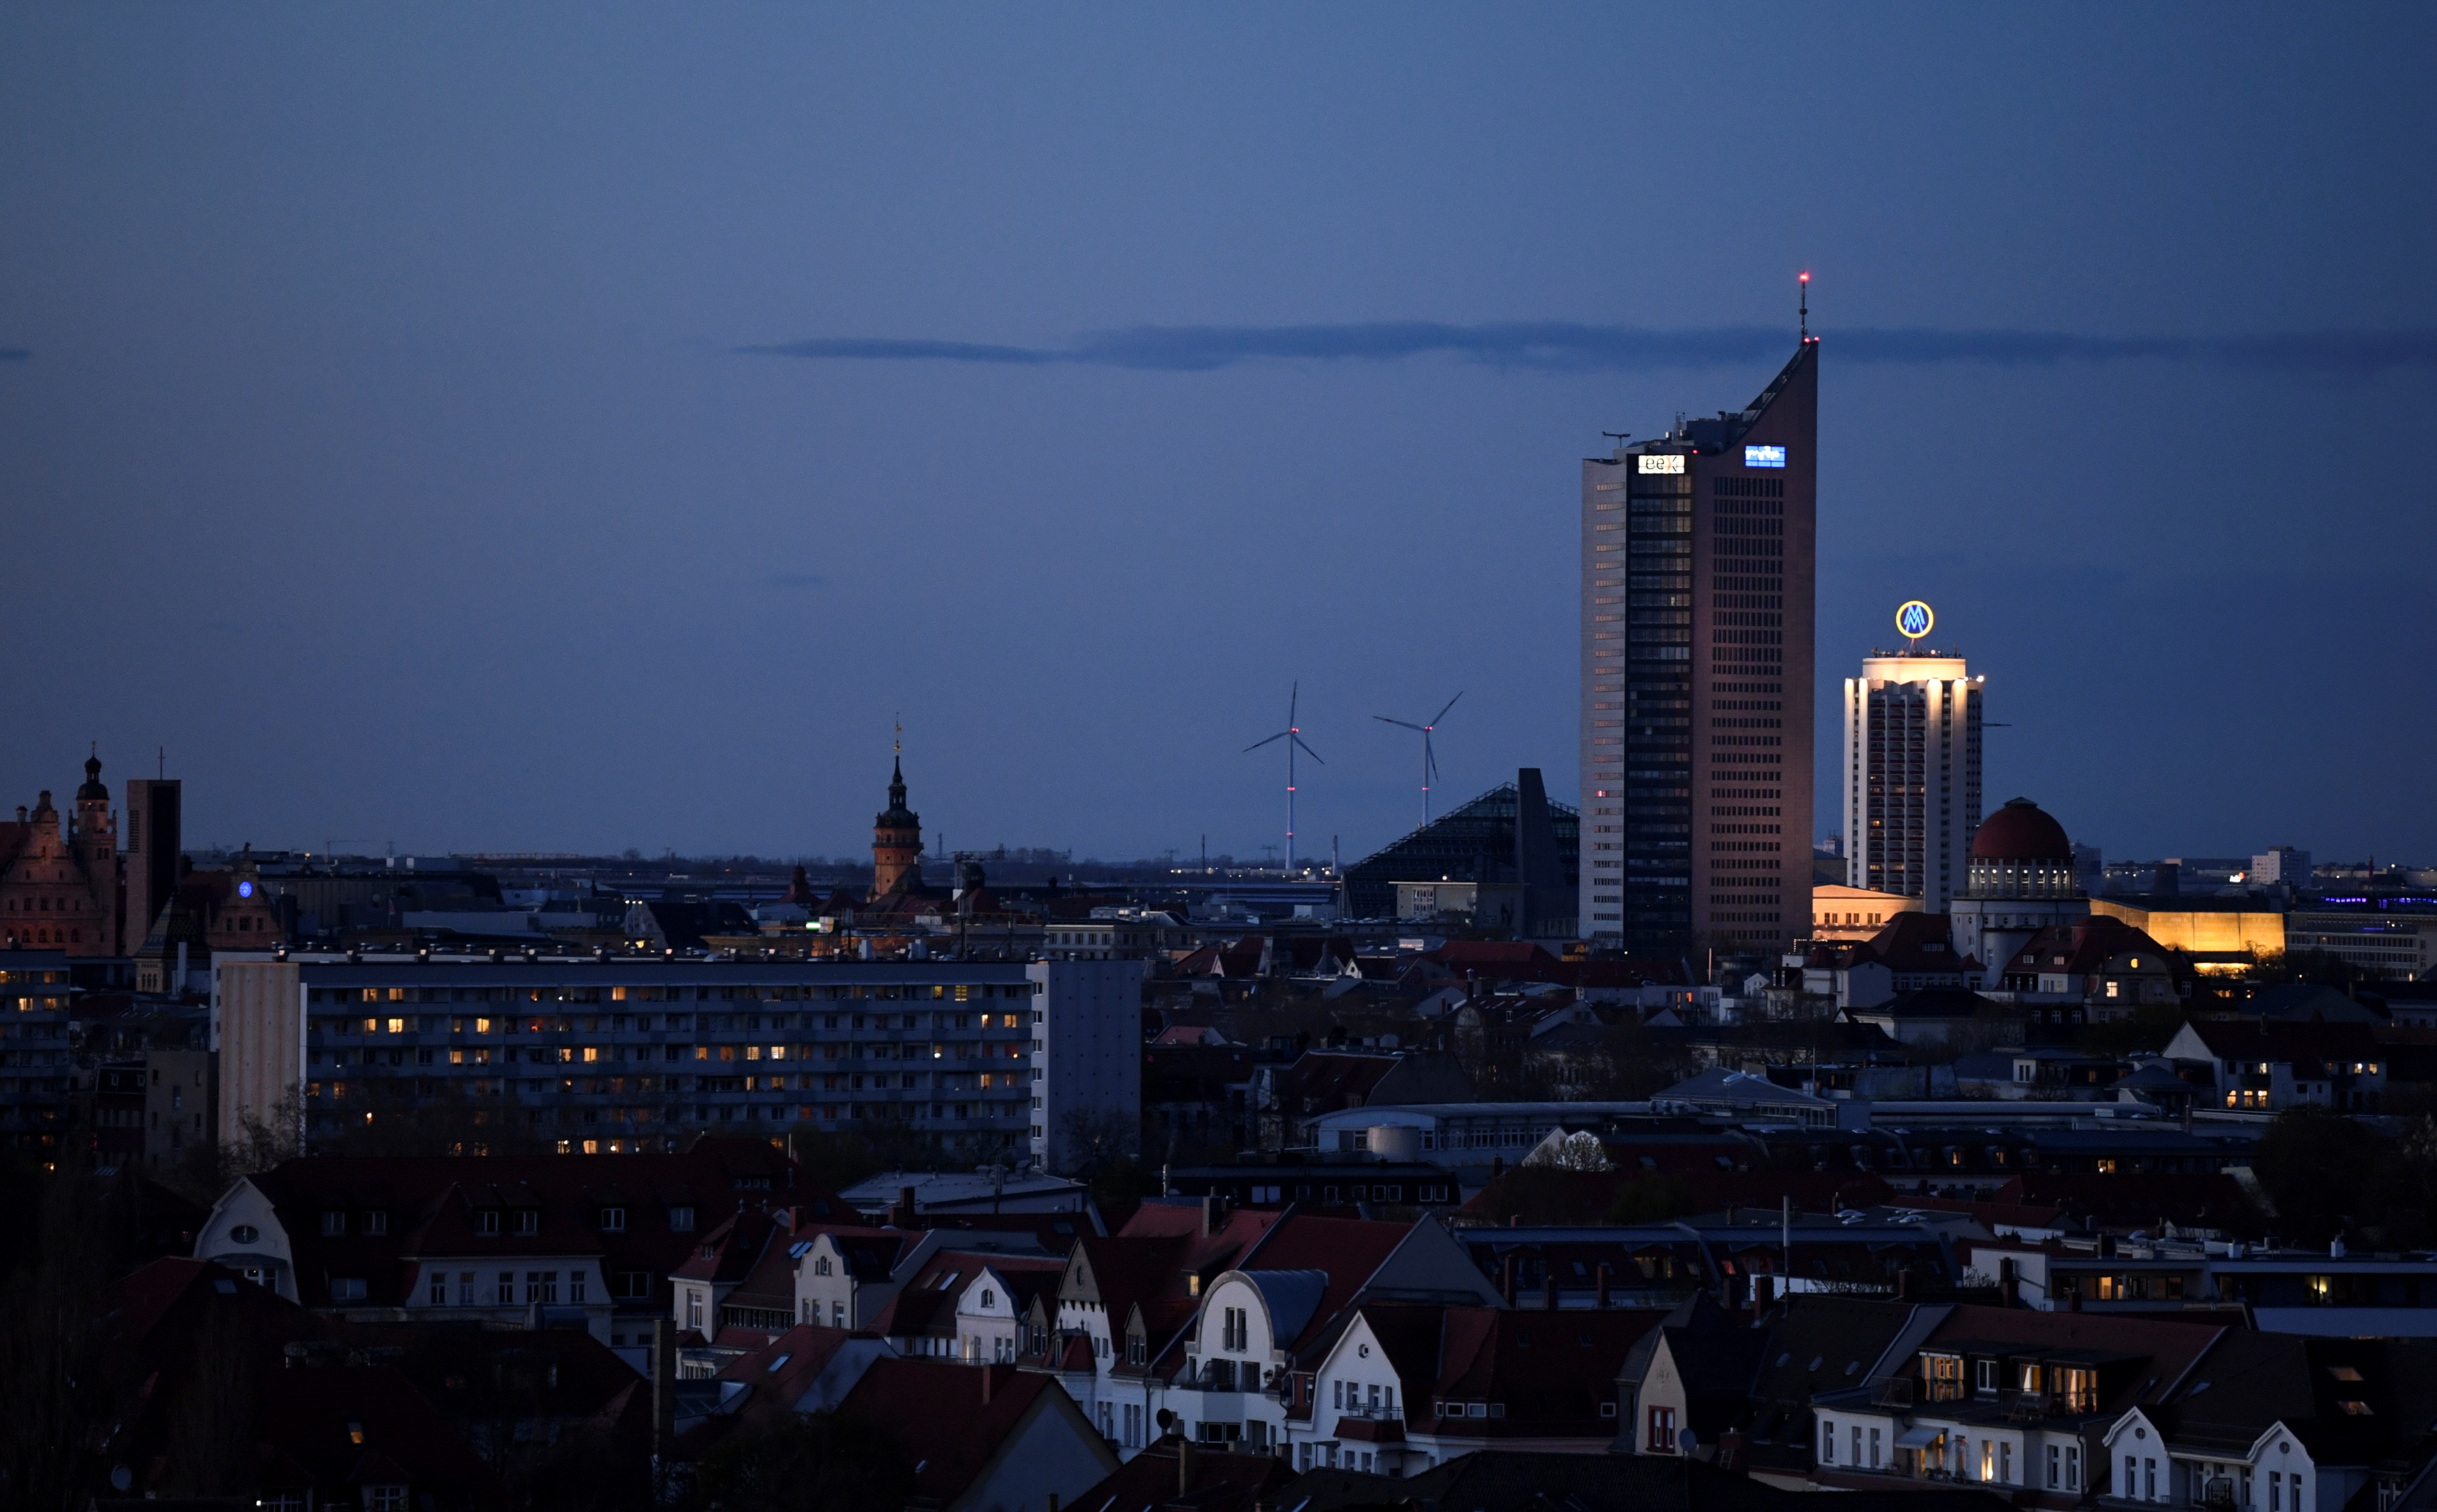 The headquarters of the European Energy Exchange (EEX), world's biggest online power trading platform is seen in a centre-of-town high-rise office building in Leipzig